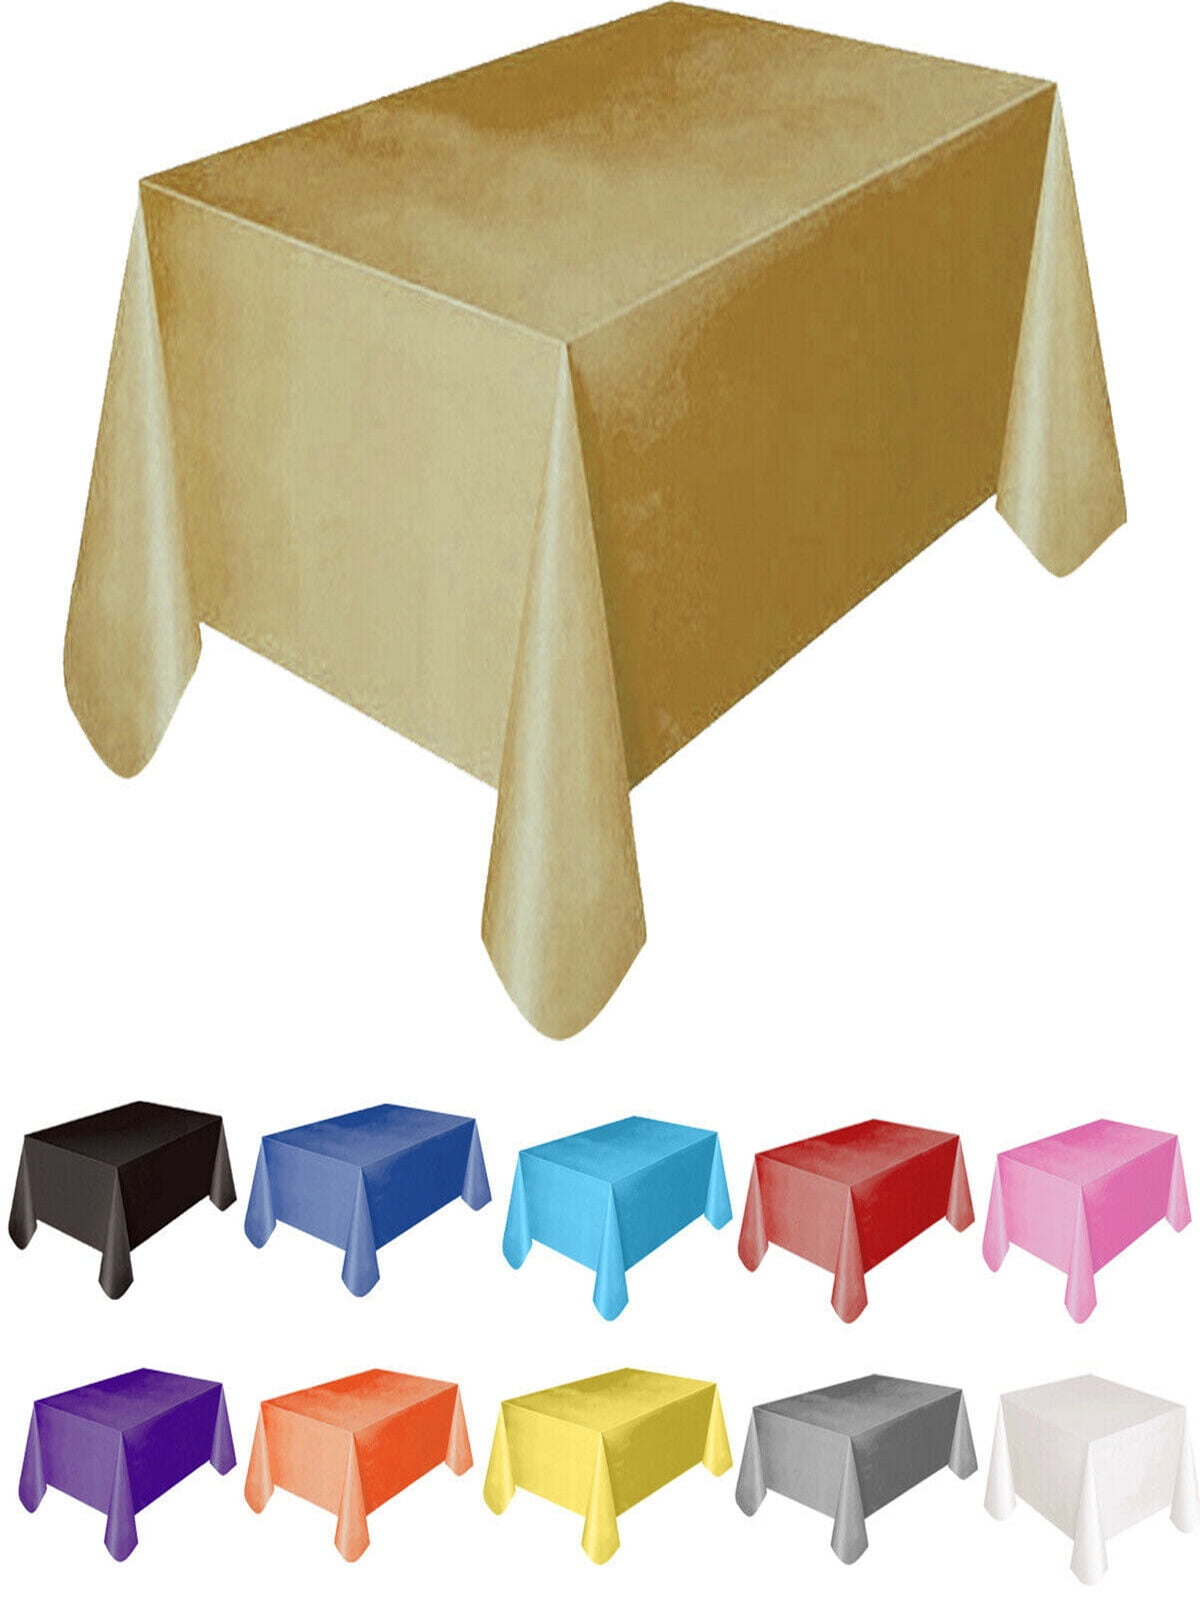 Solid Plastic Rectangle Table Cover Cloth Wipe Clean Party Tablecloth Covers NEW 